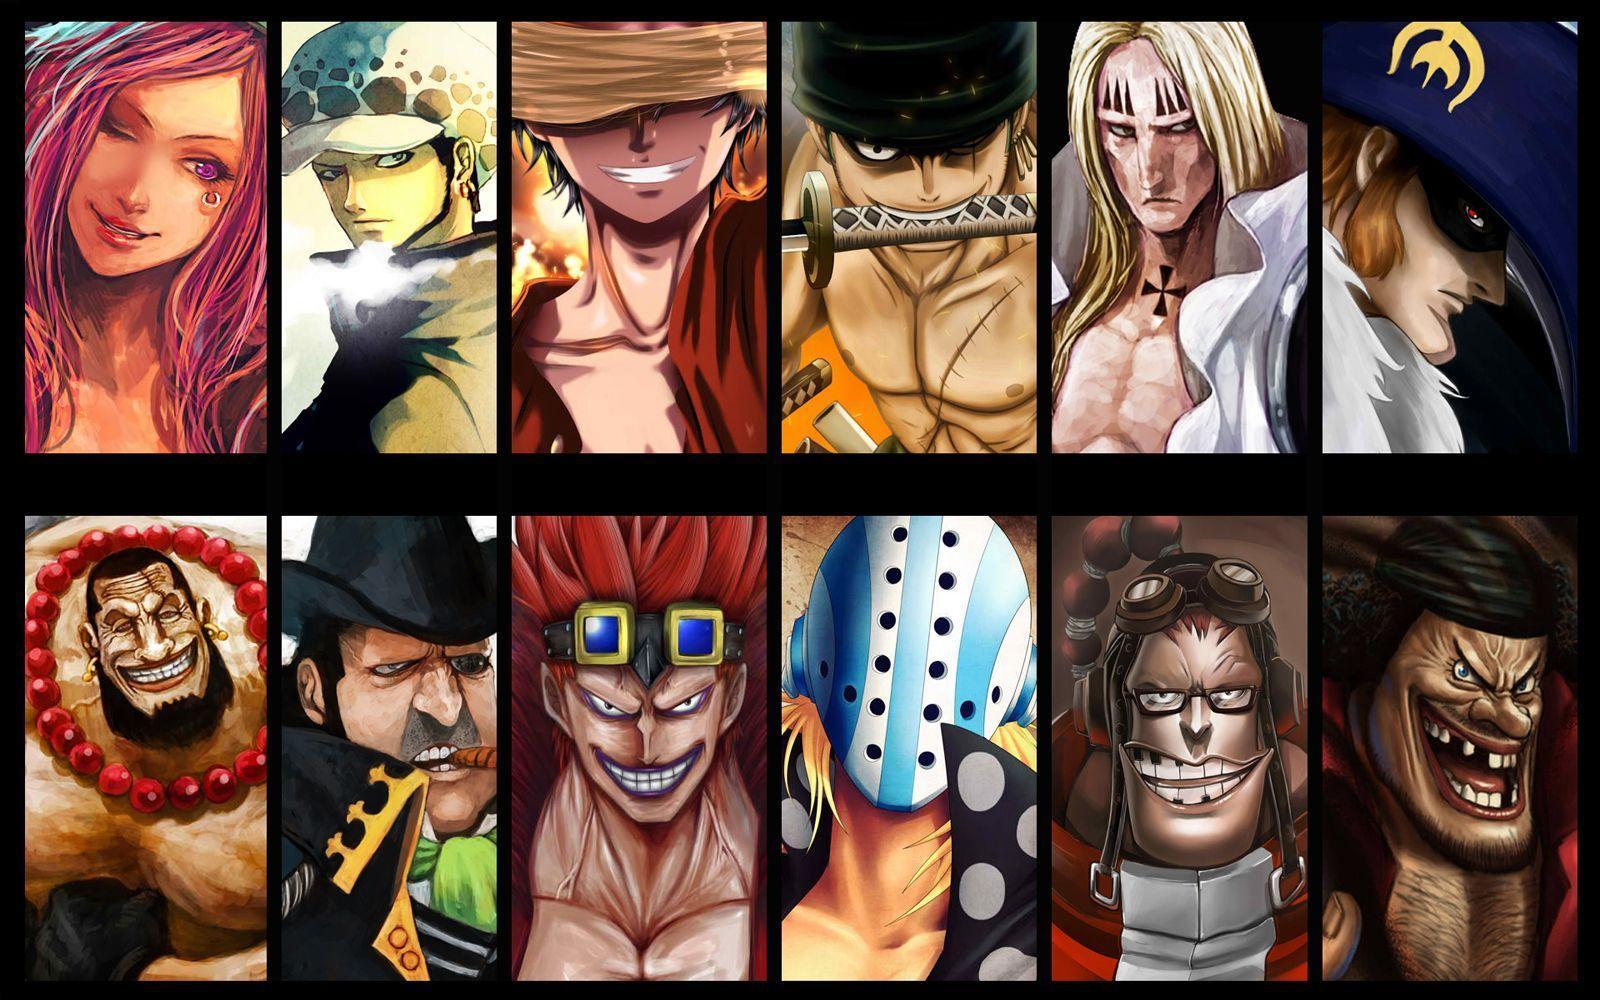 Worst Generation Supernova One Piece Wallpaper by xkronos. Daily